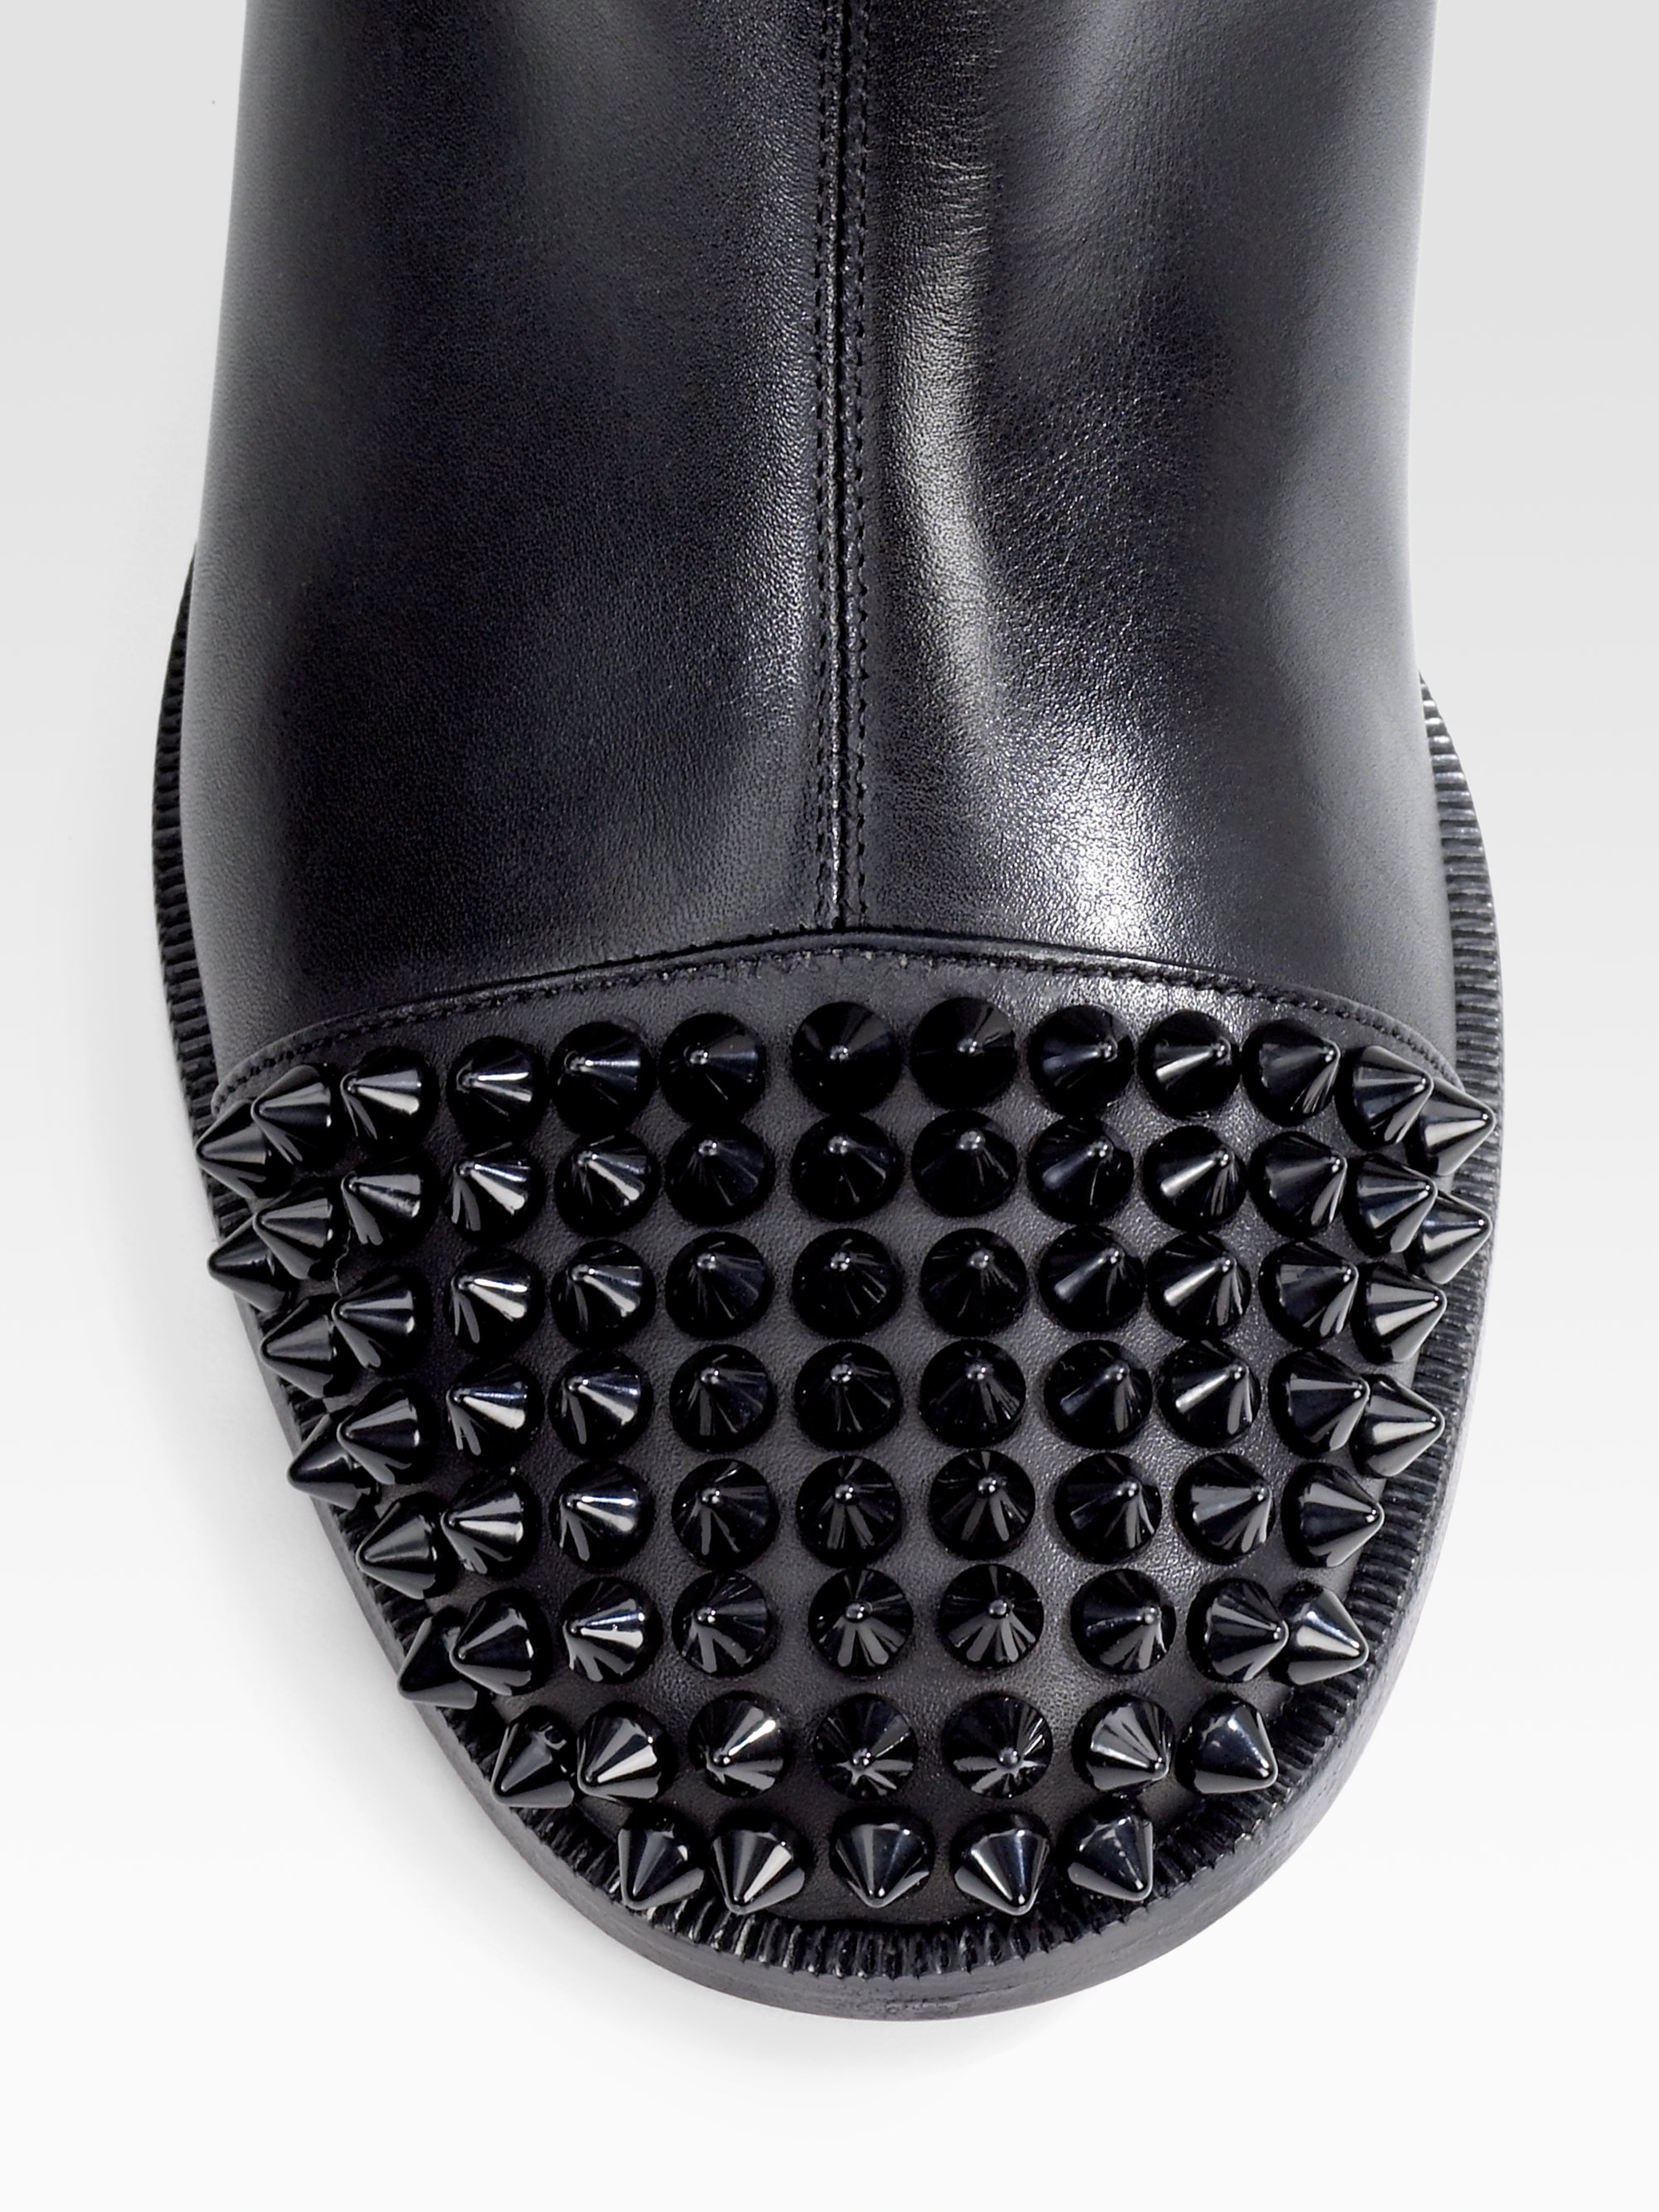 Christian louboutin Egoutina Hidden wedge Spiked Boots in Black | Lyst  